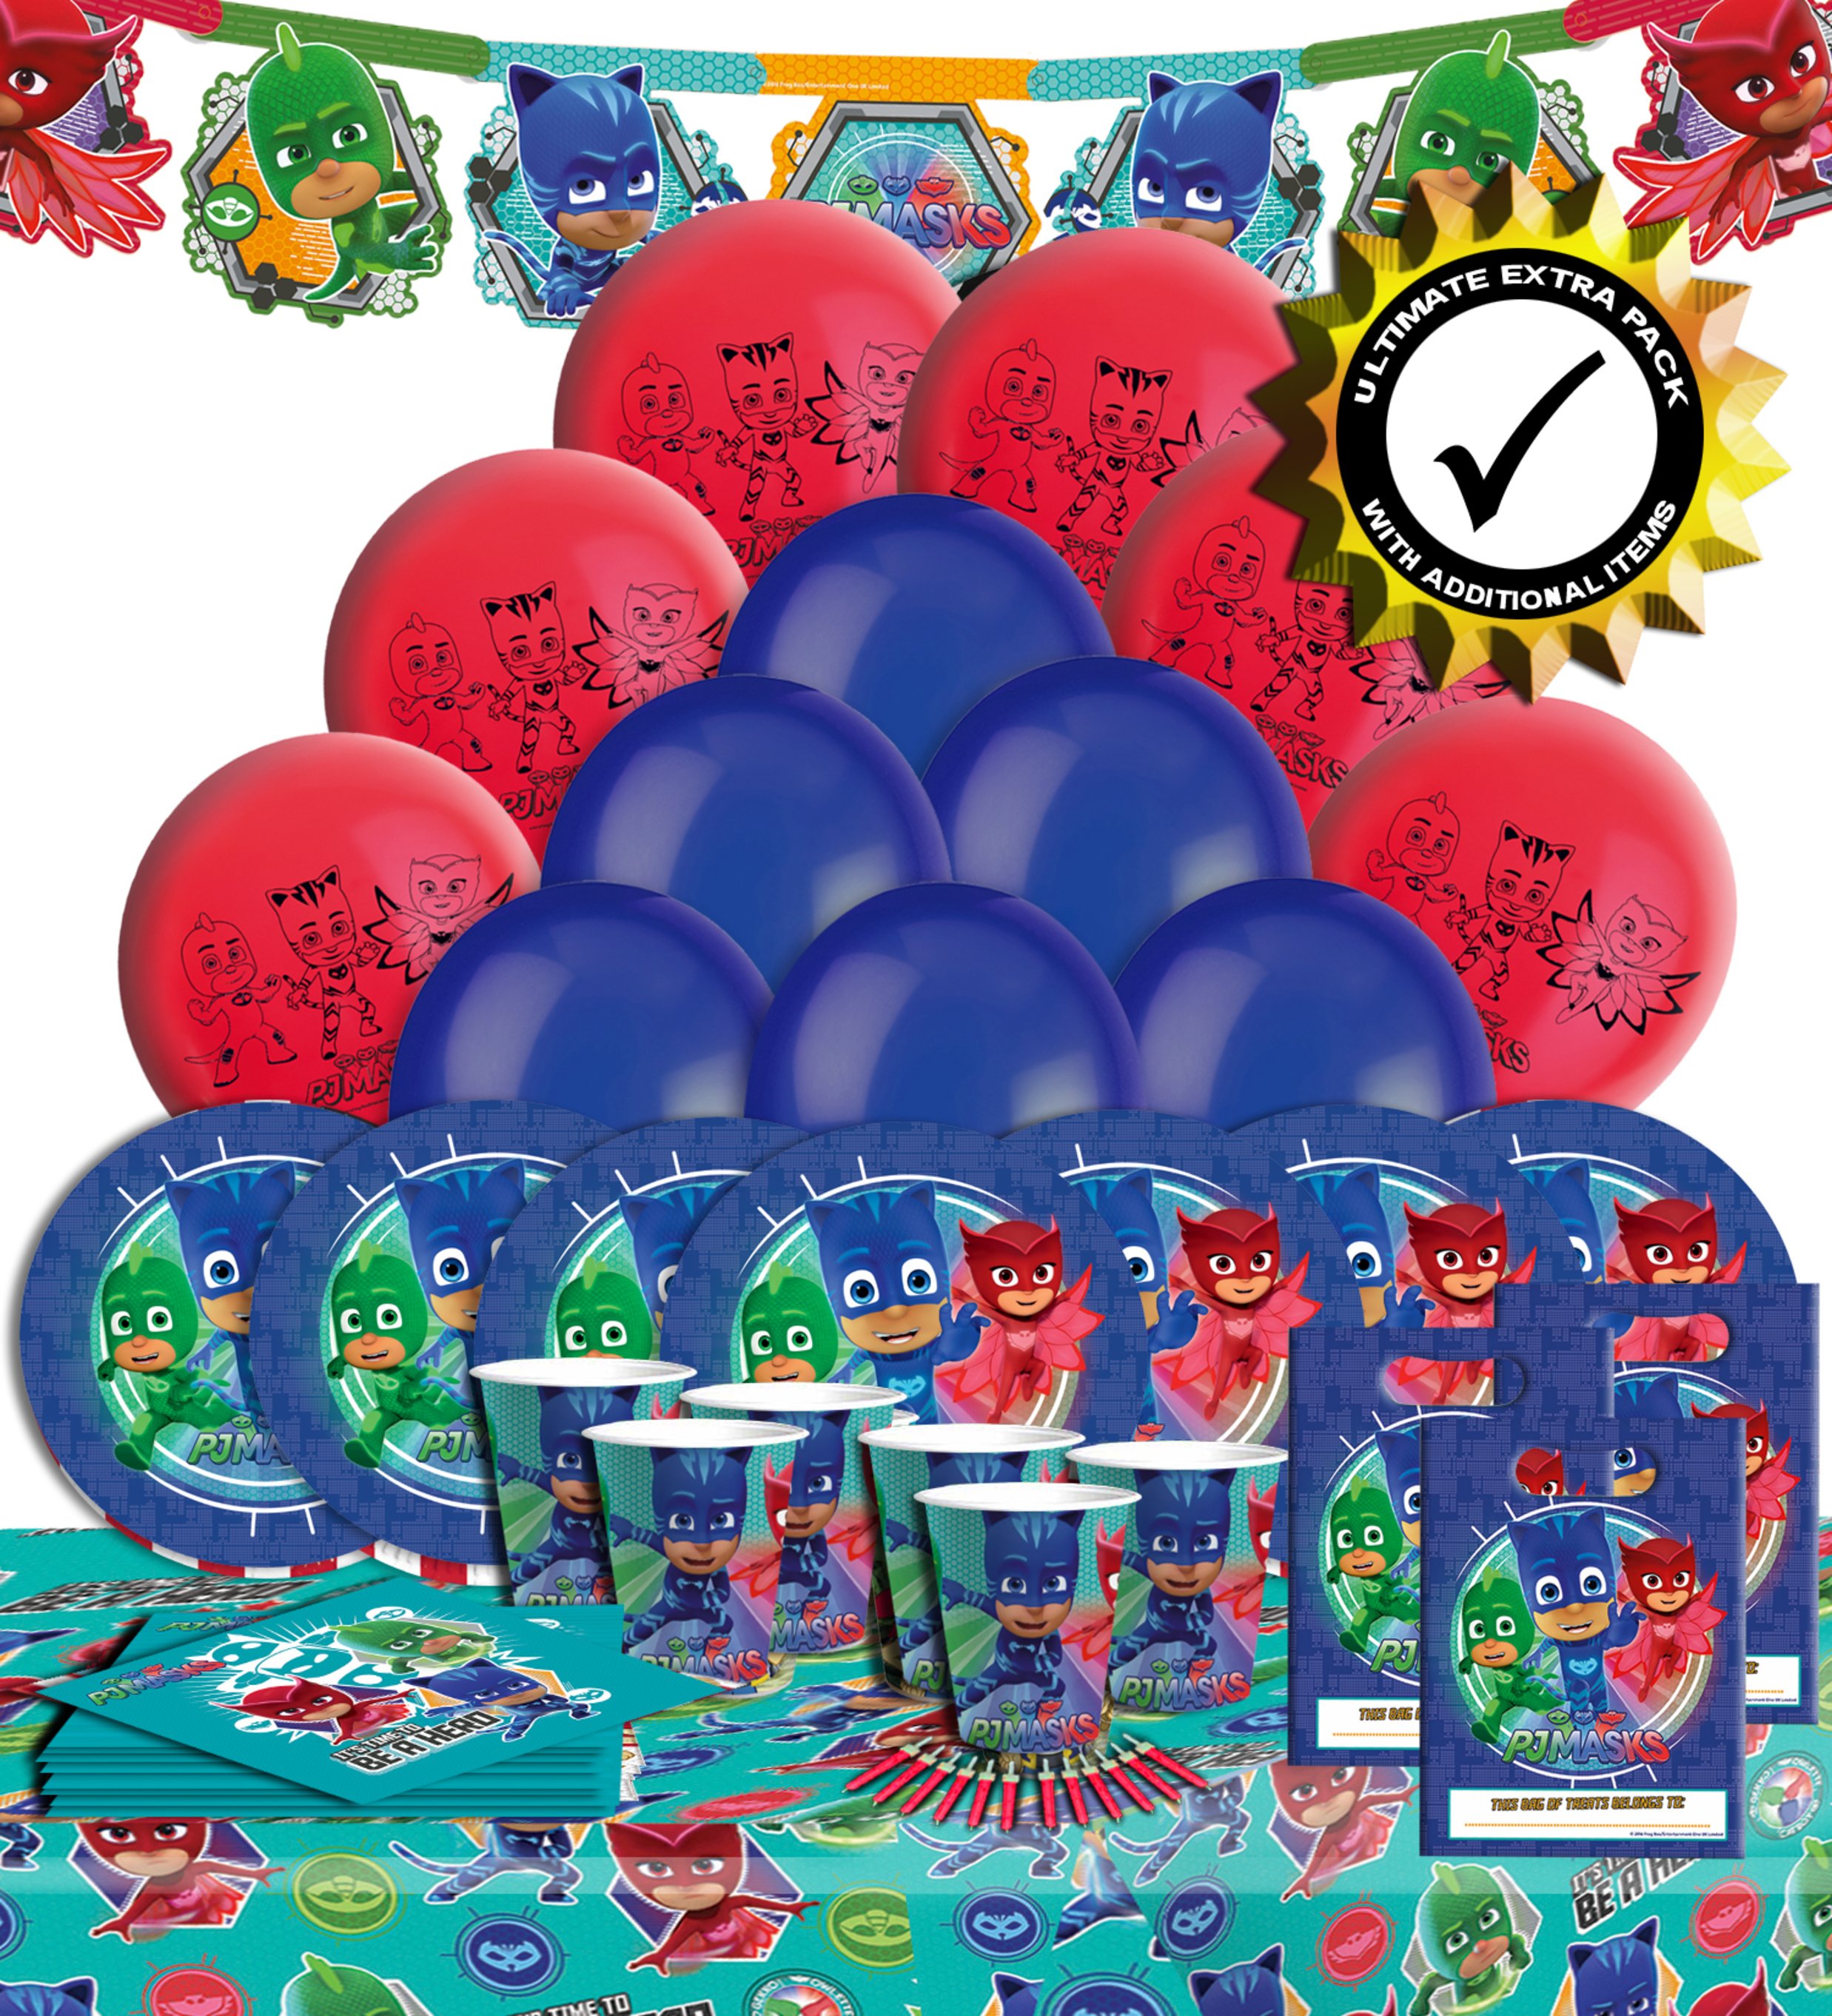 PJ Masks Ultimate Extra Party Pack